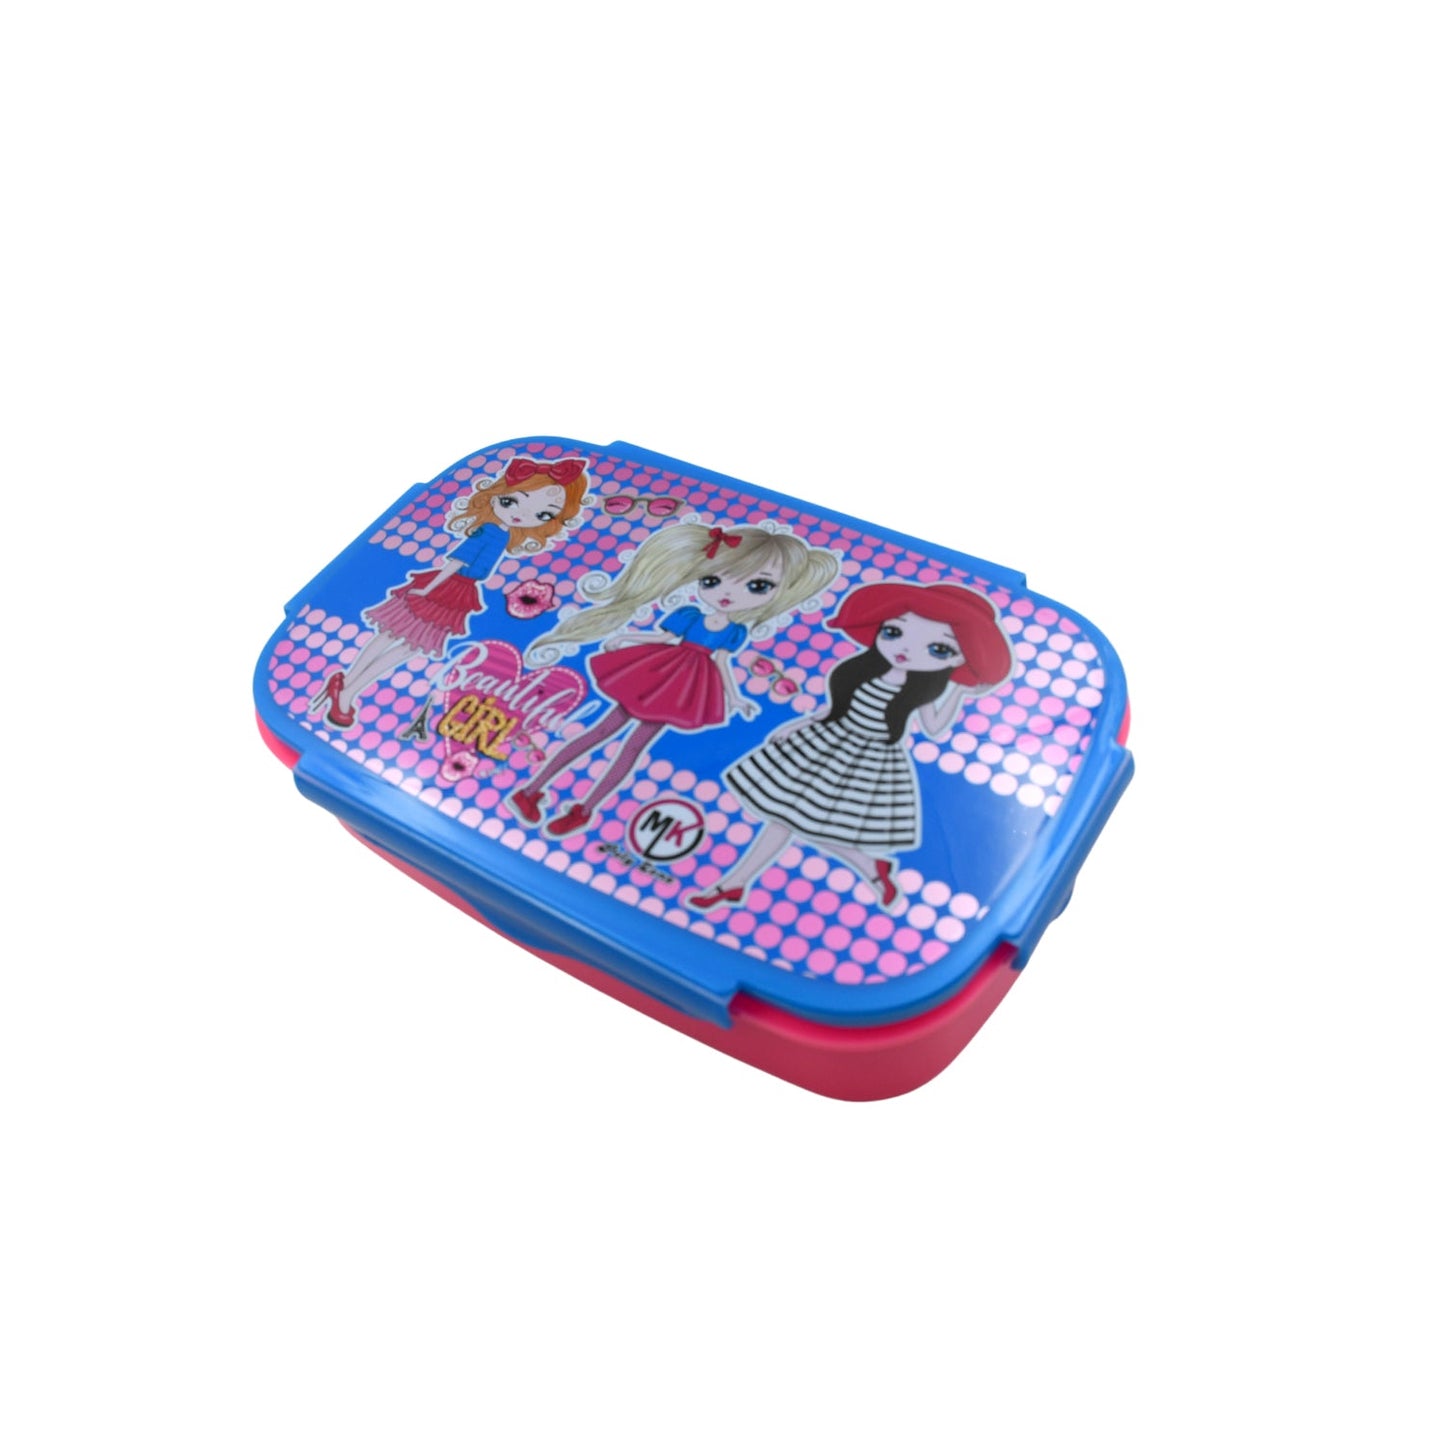 5983 Cartoon Printed Plastic Lunch Box With Inside Small Box & Spoon for Kids, Air Tight Lunch Tiffin Box for Girls Boys, Food Container, Specially Designed for School Going Boys and Girls